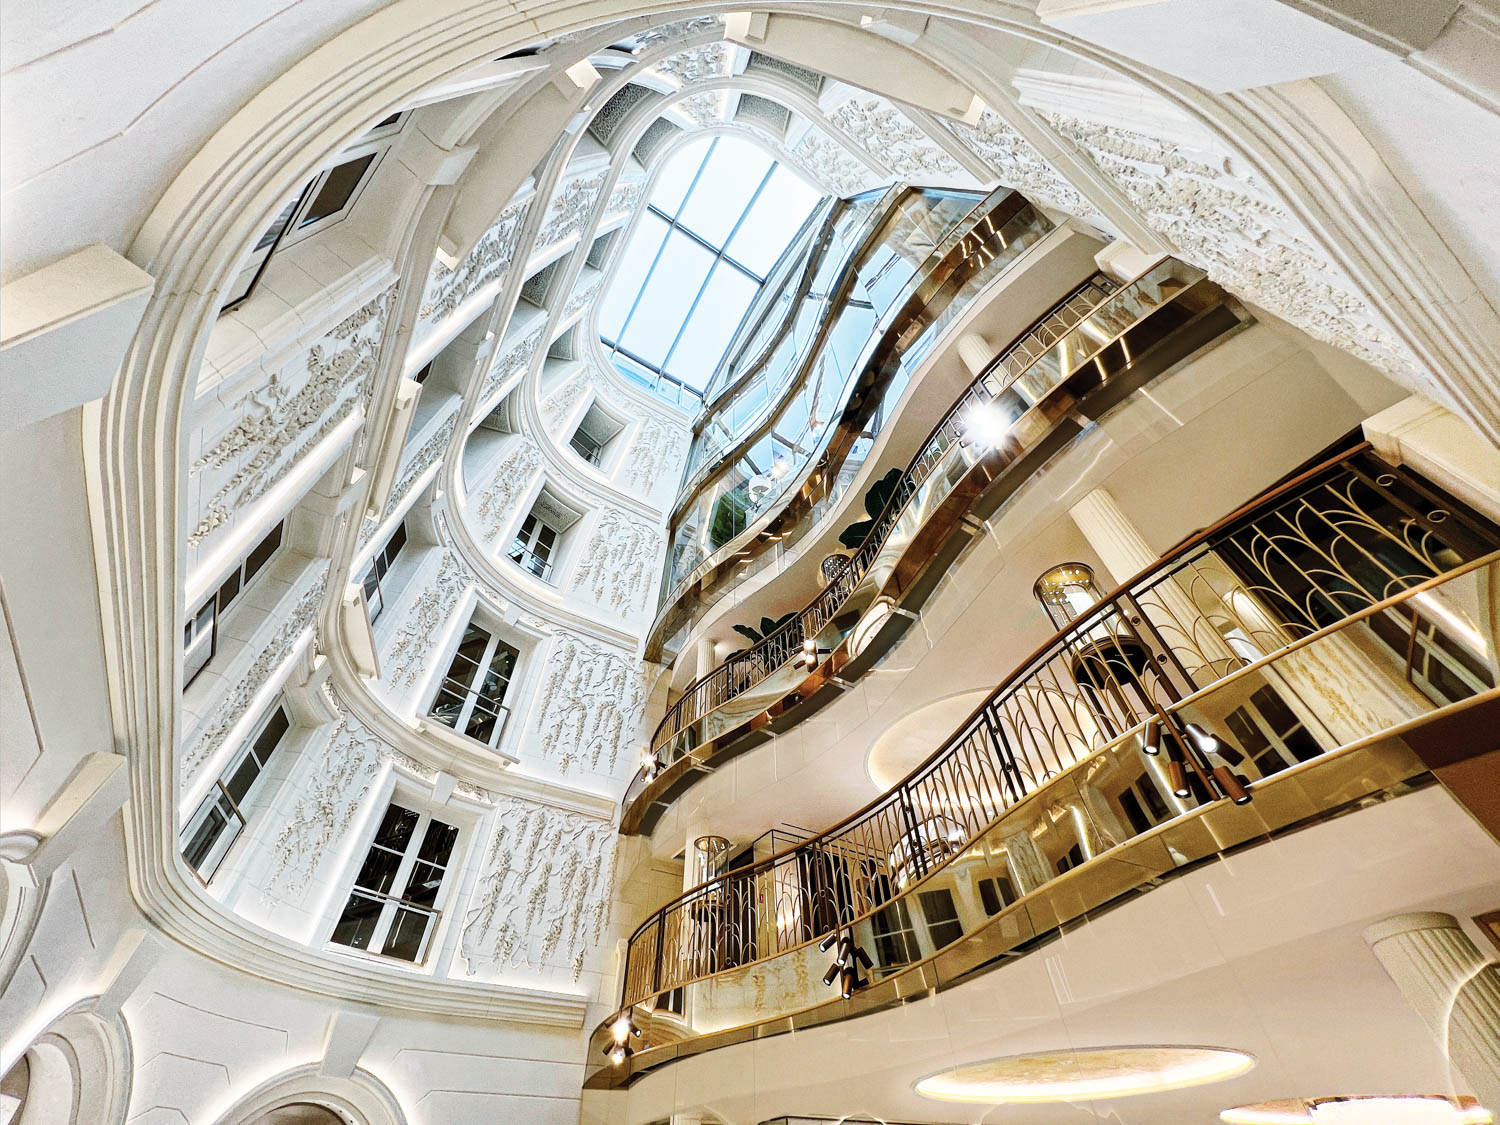 looking up through the six levels of 13 Paix, a luxury French jeweler